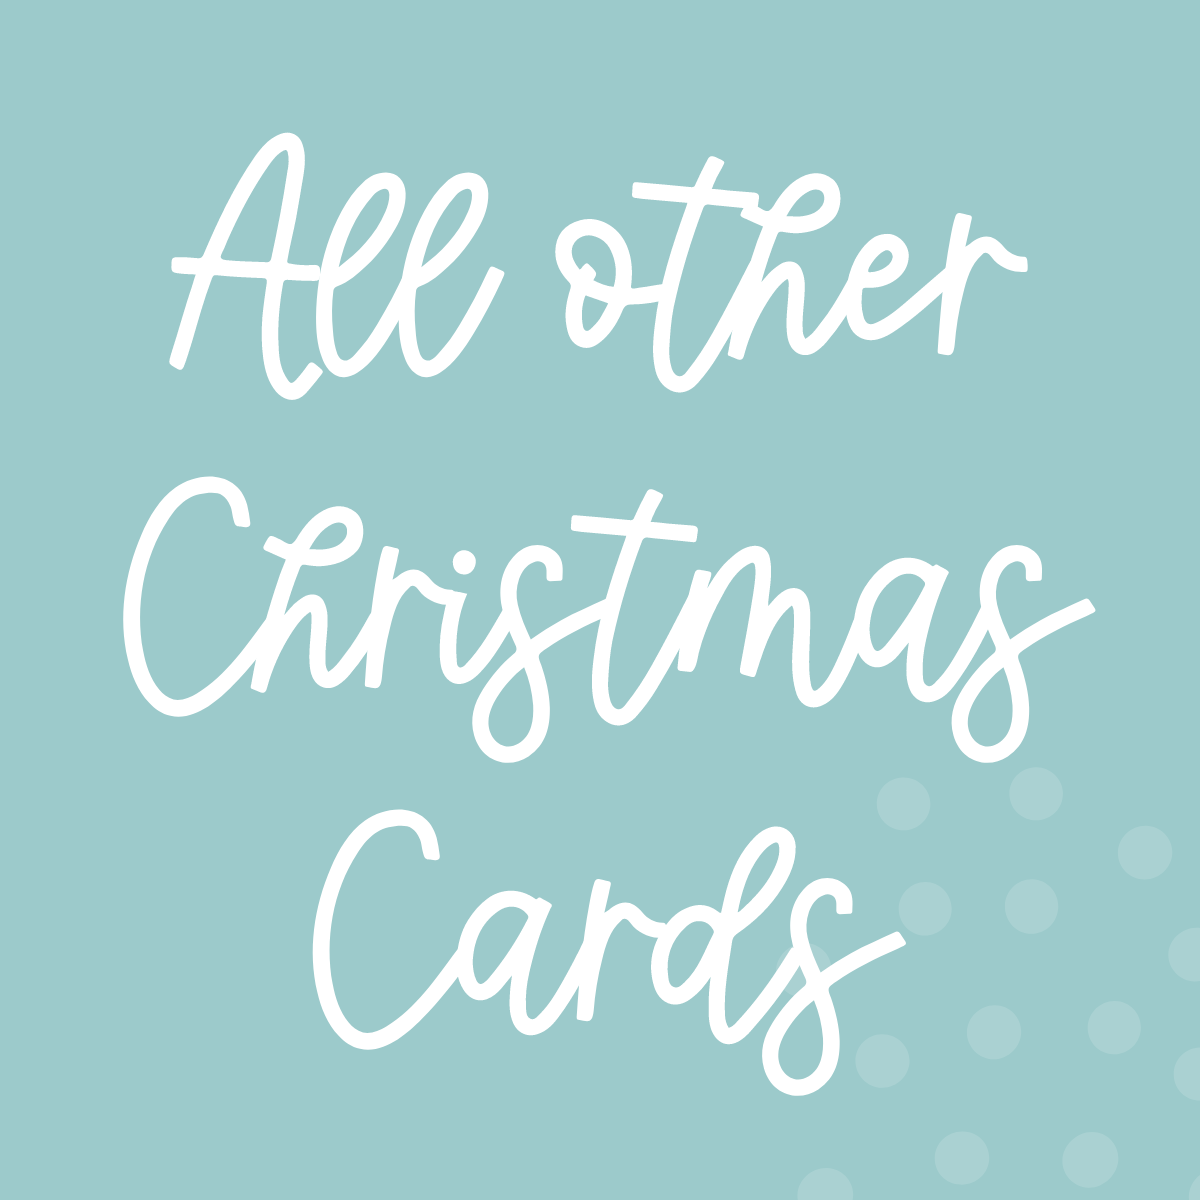 All Other Christmas Cards